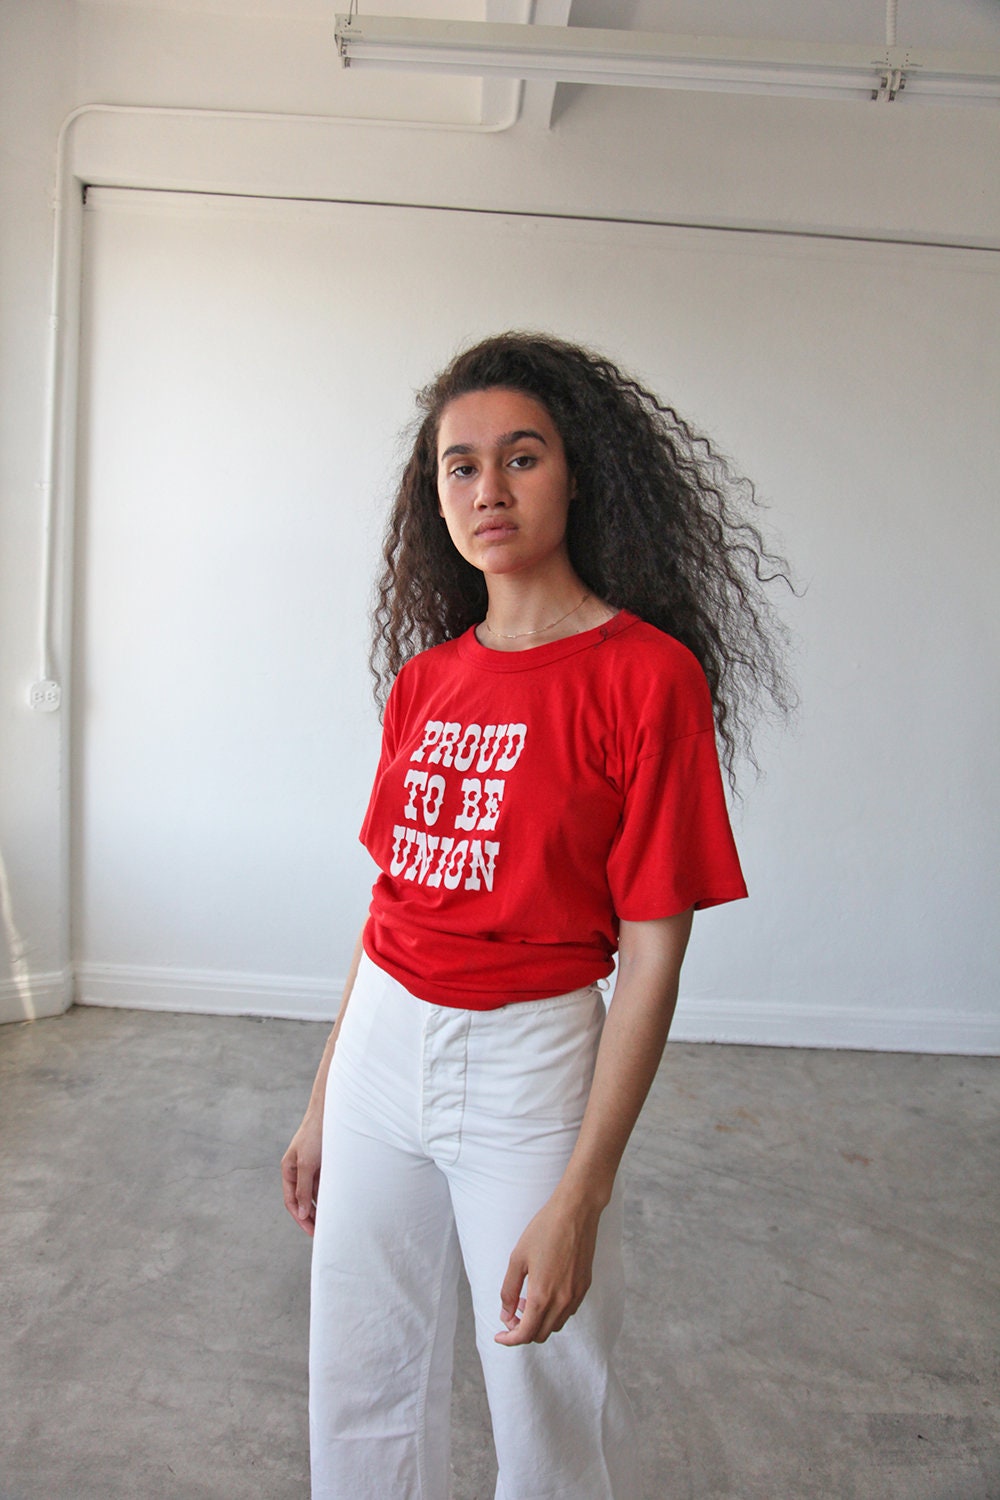 SALE 40% OFF Proud To Be Union Tee